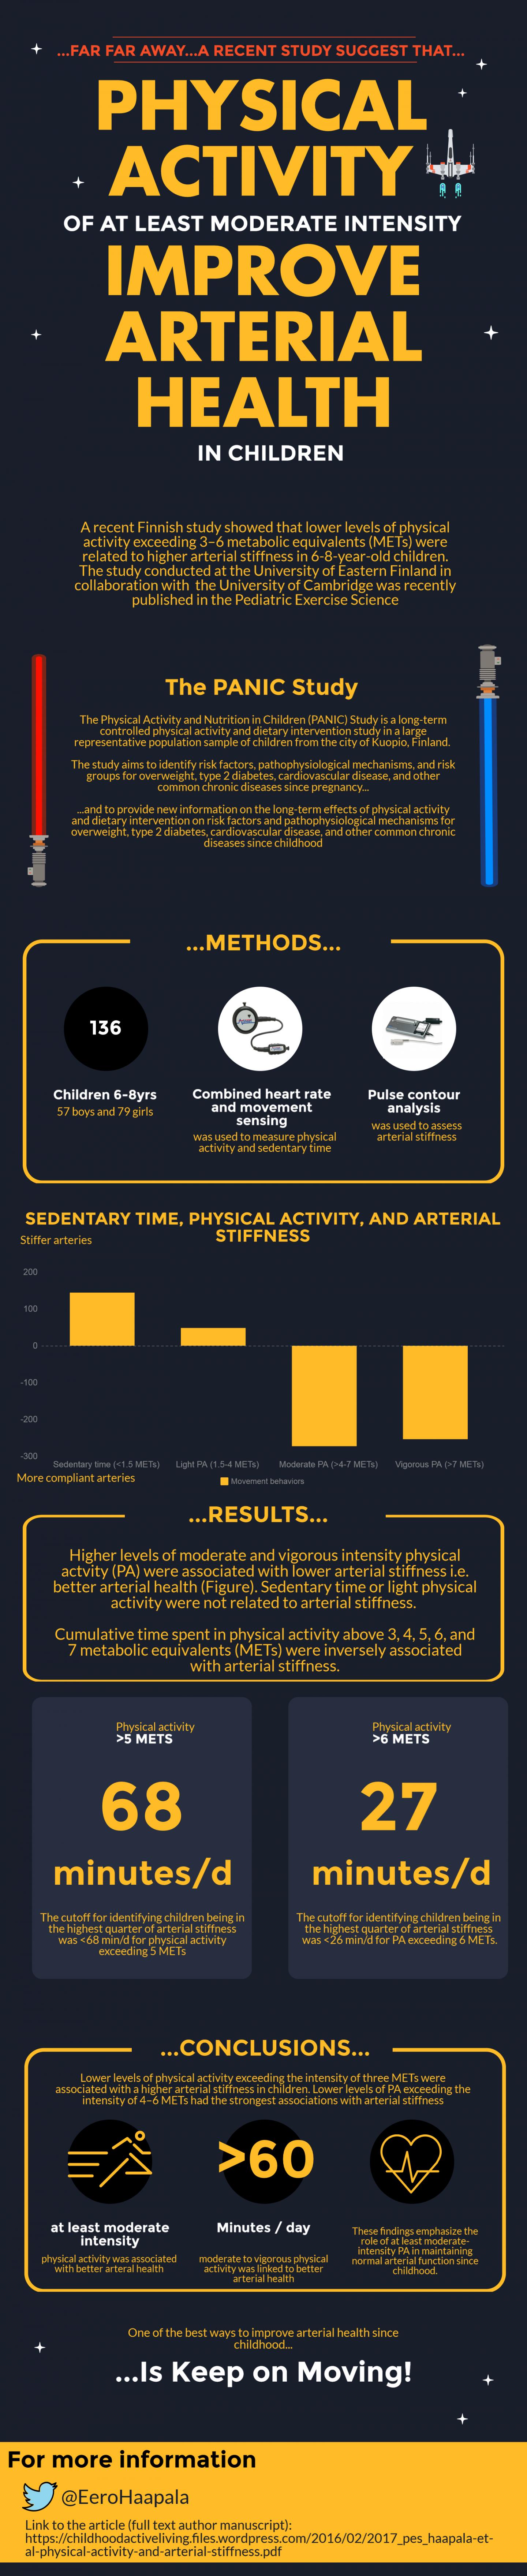 Physical Activity and Arterial Health